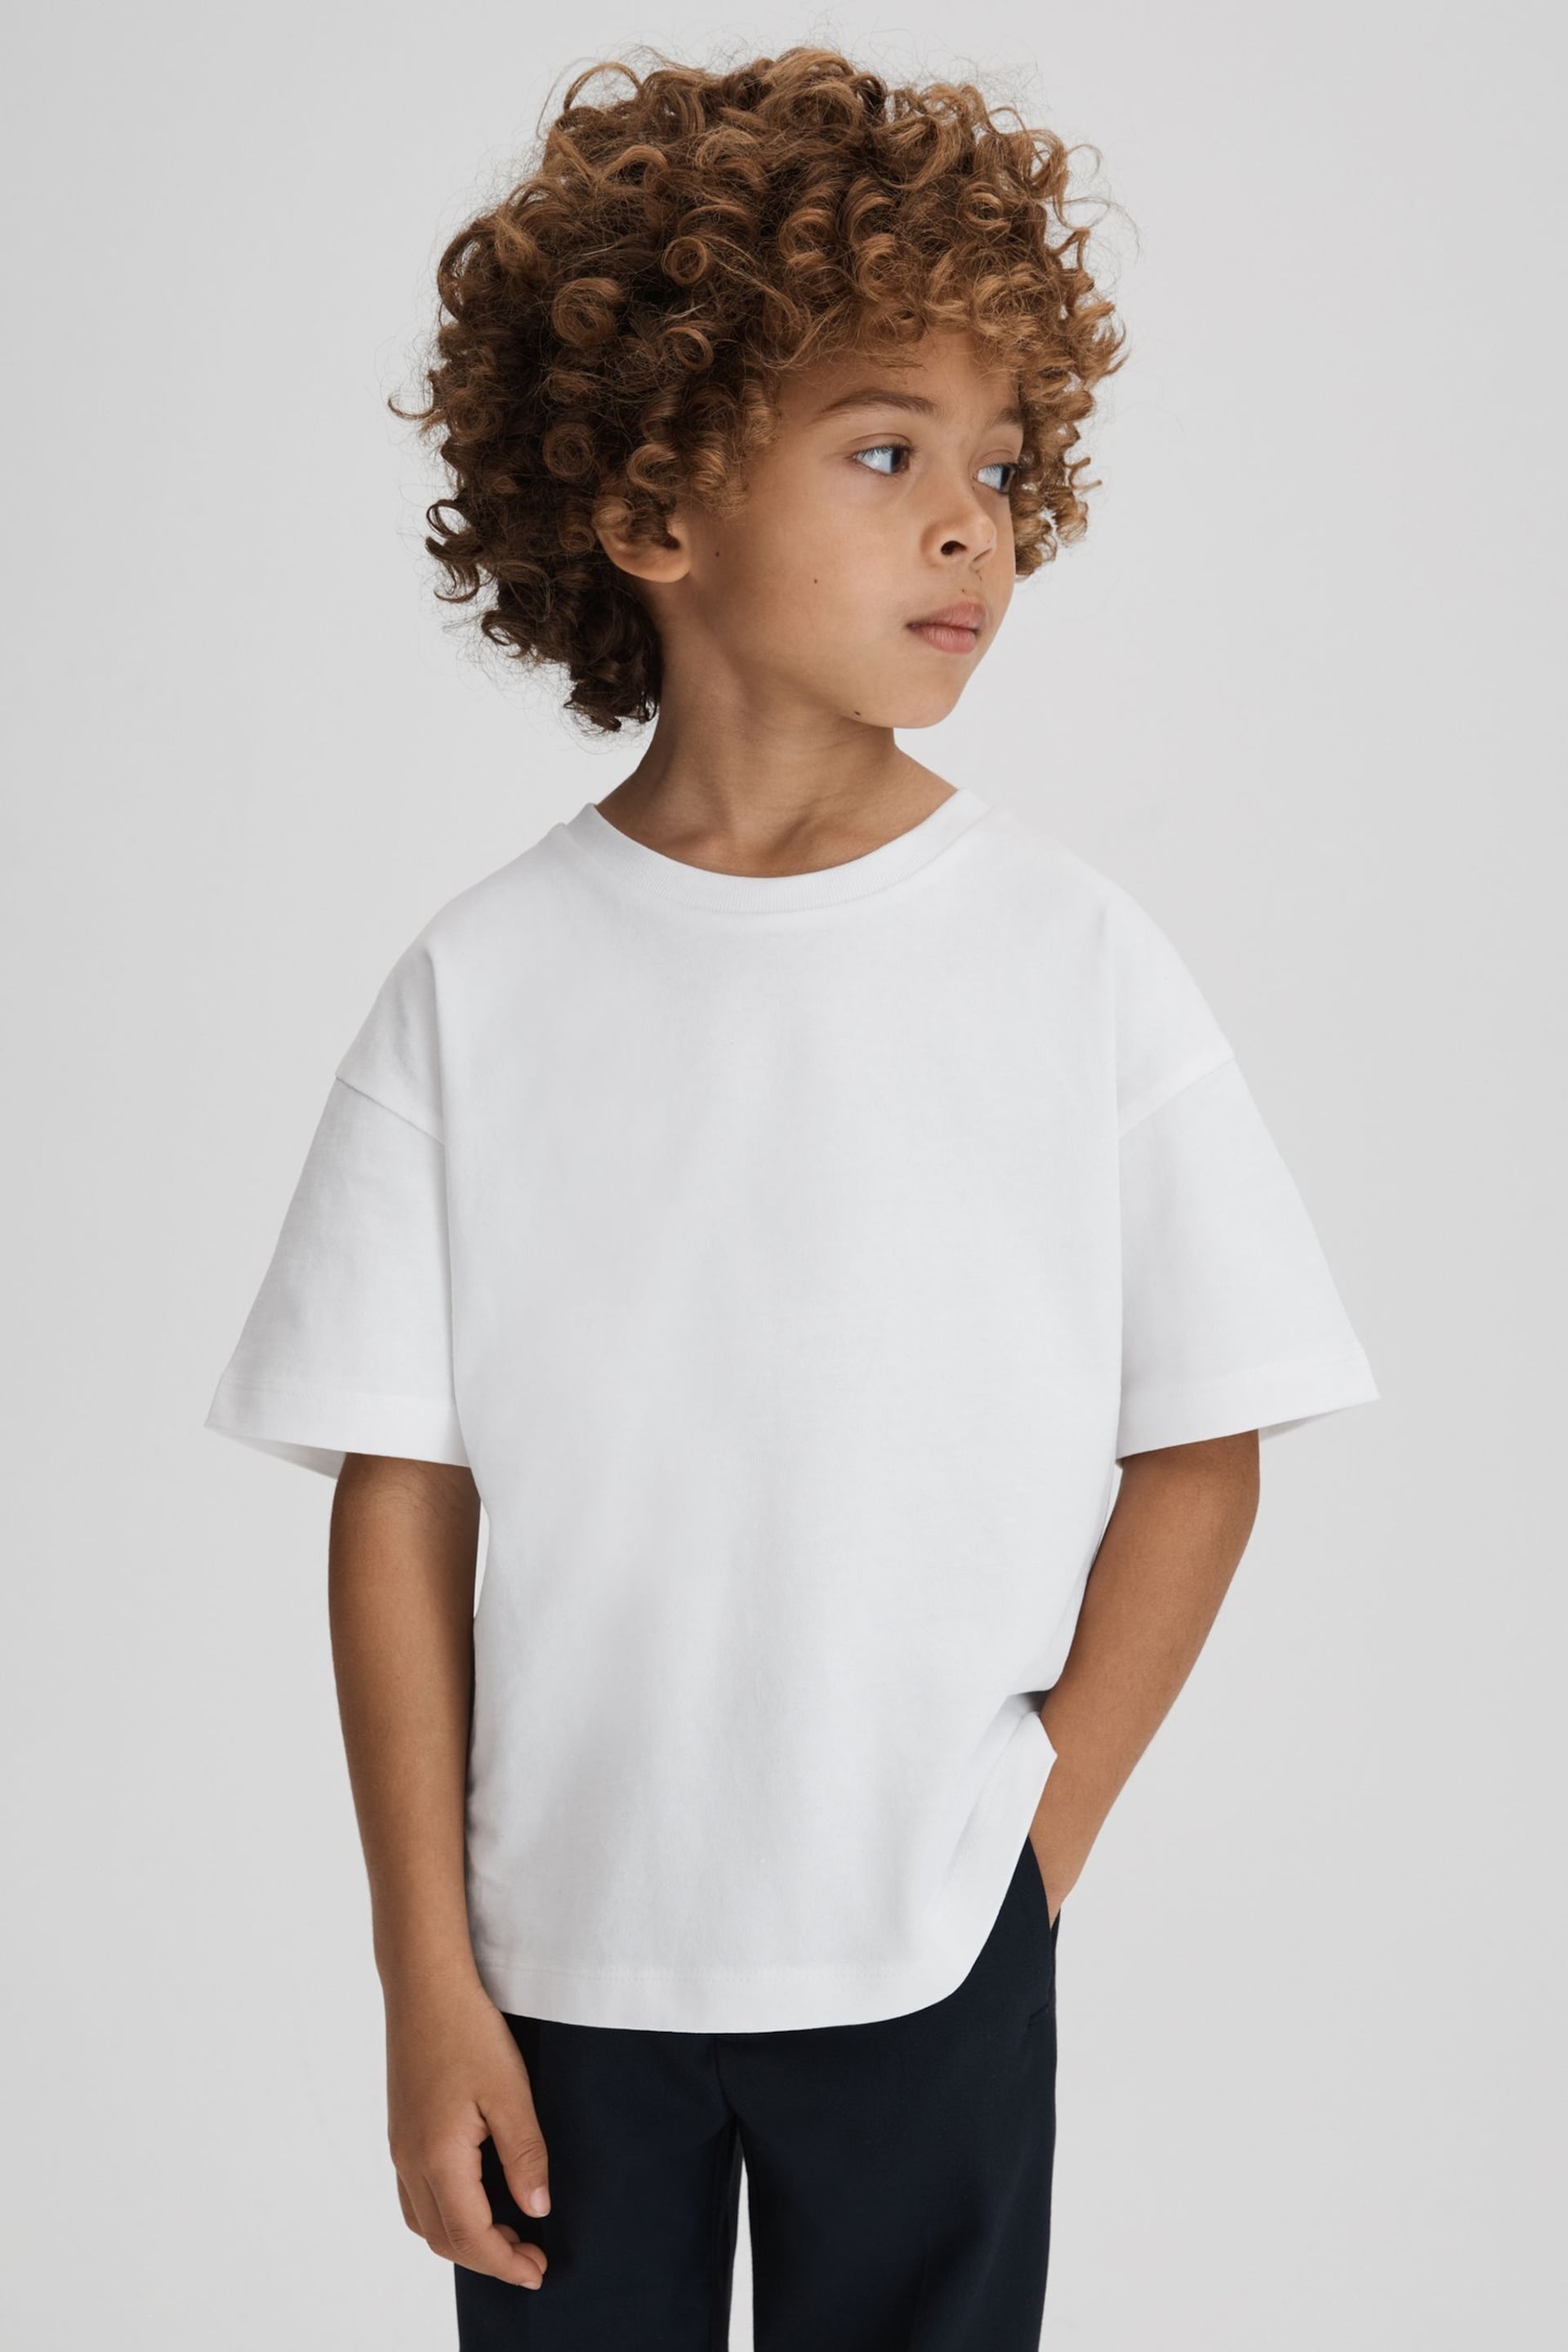 Reiss White Selby Junior Oversized Cotton Crew Neck T-Shirt - Image 1 of 6